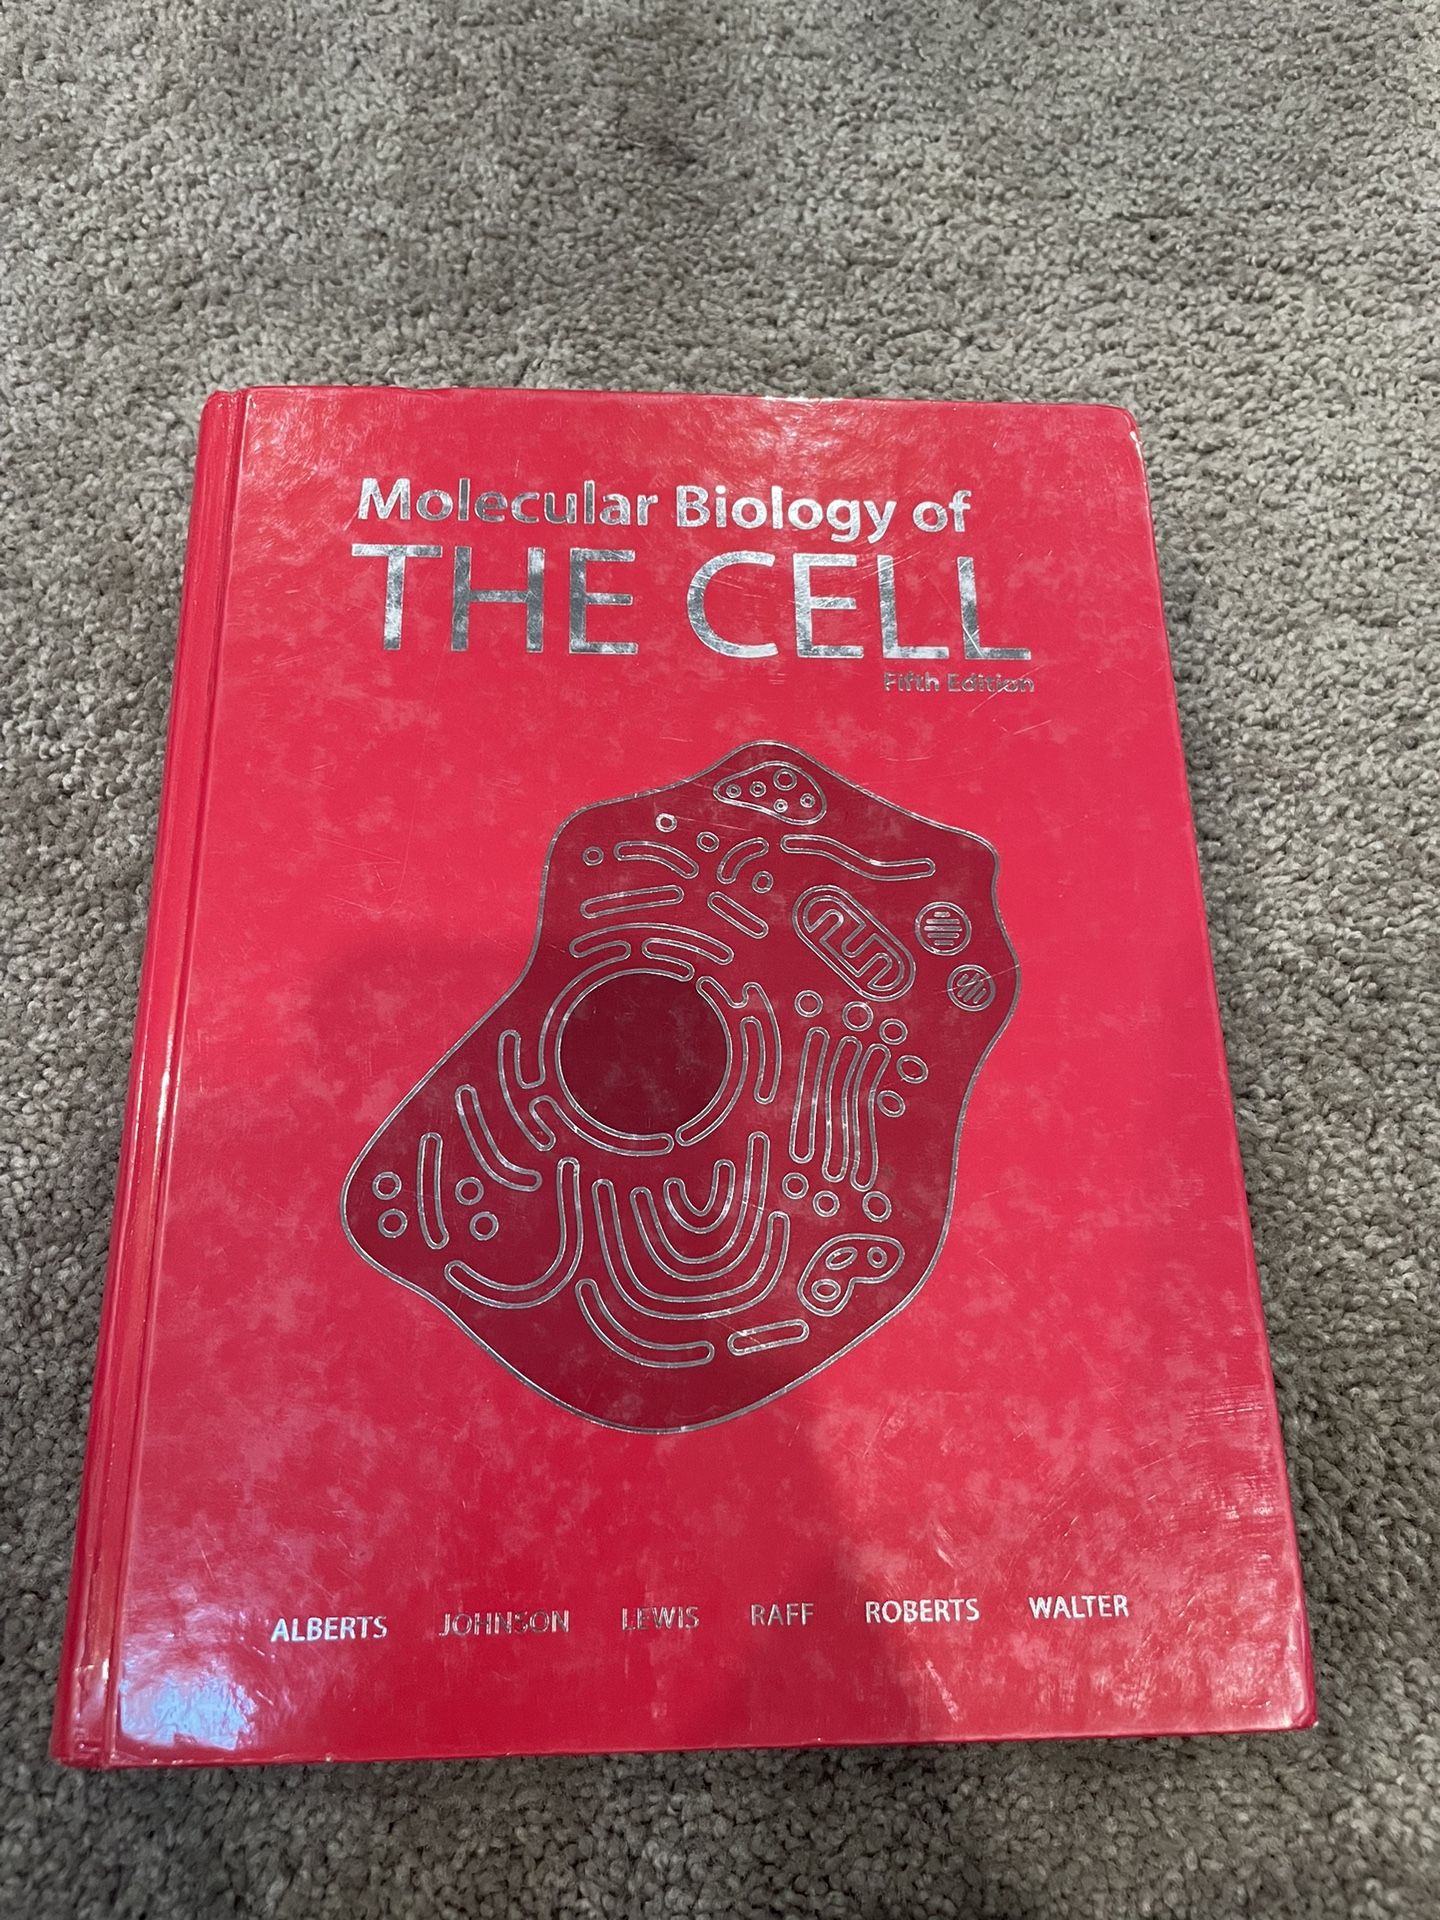 4 Textbooks: Cell, Veterinary, Anthropology